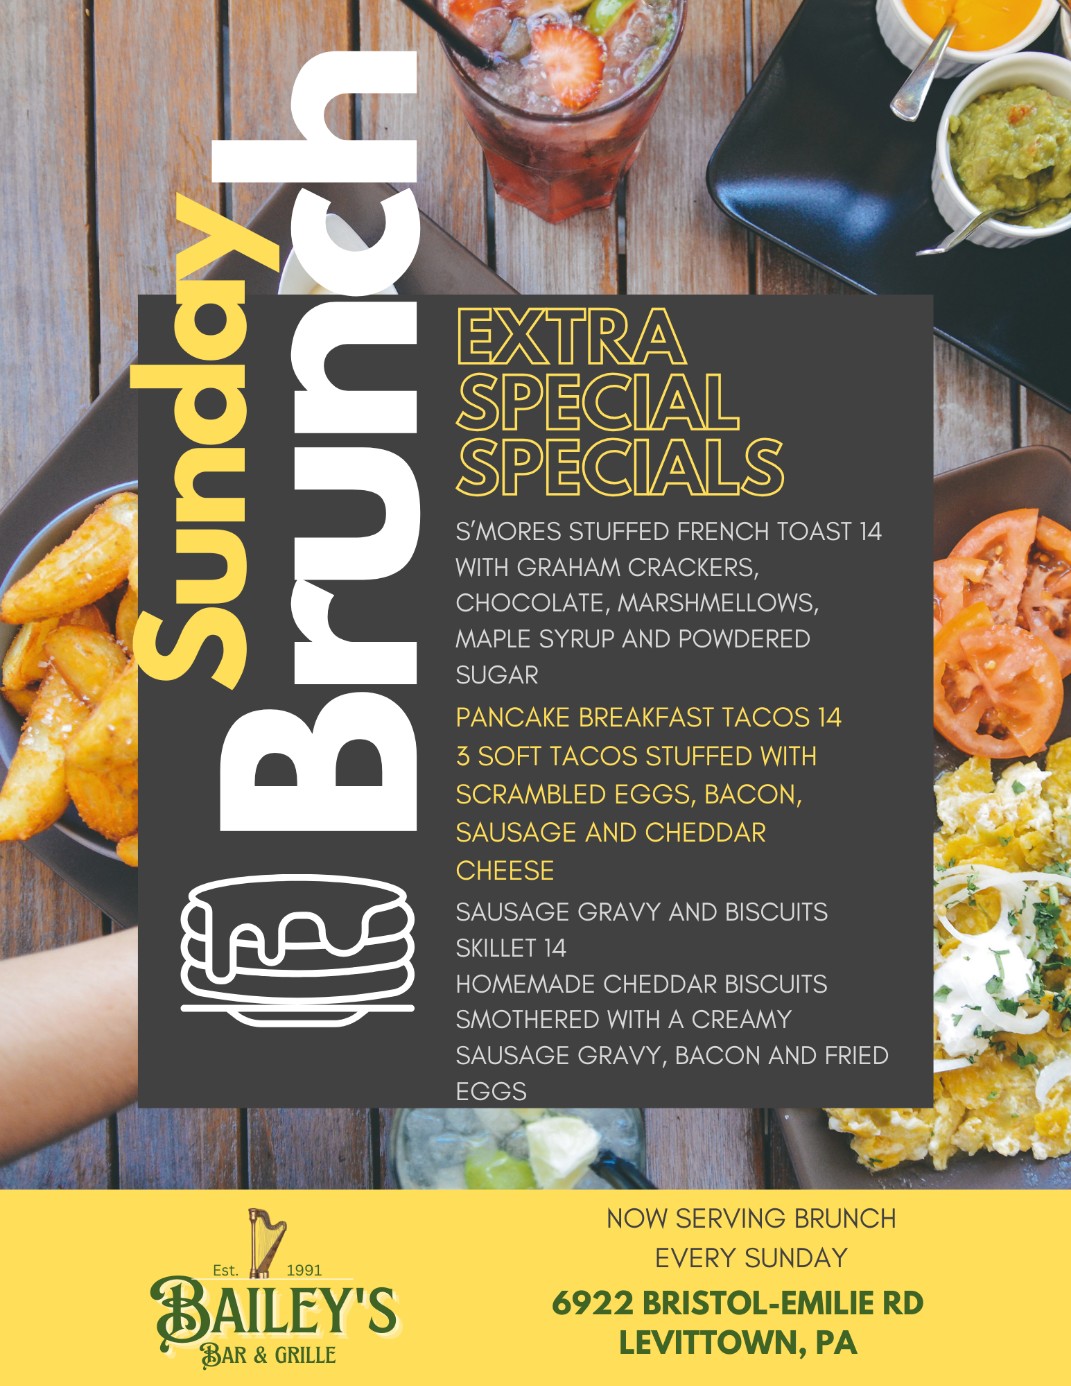 Brunch menu with a variety of dishes on a wooden table.